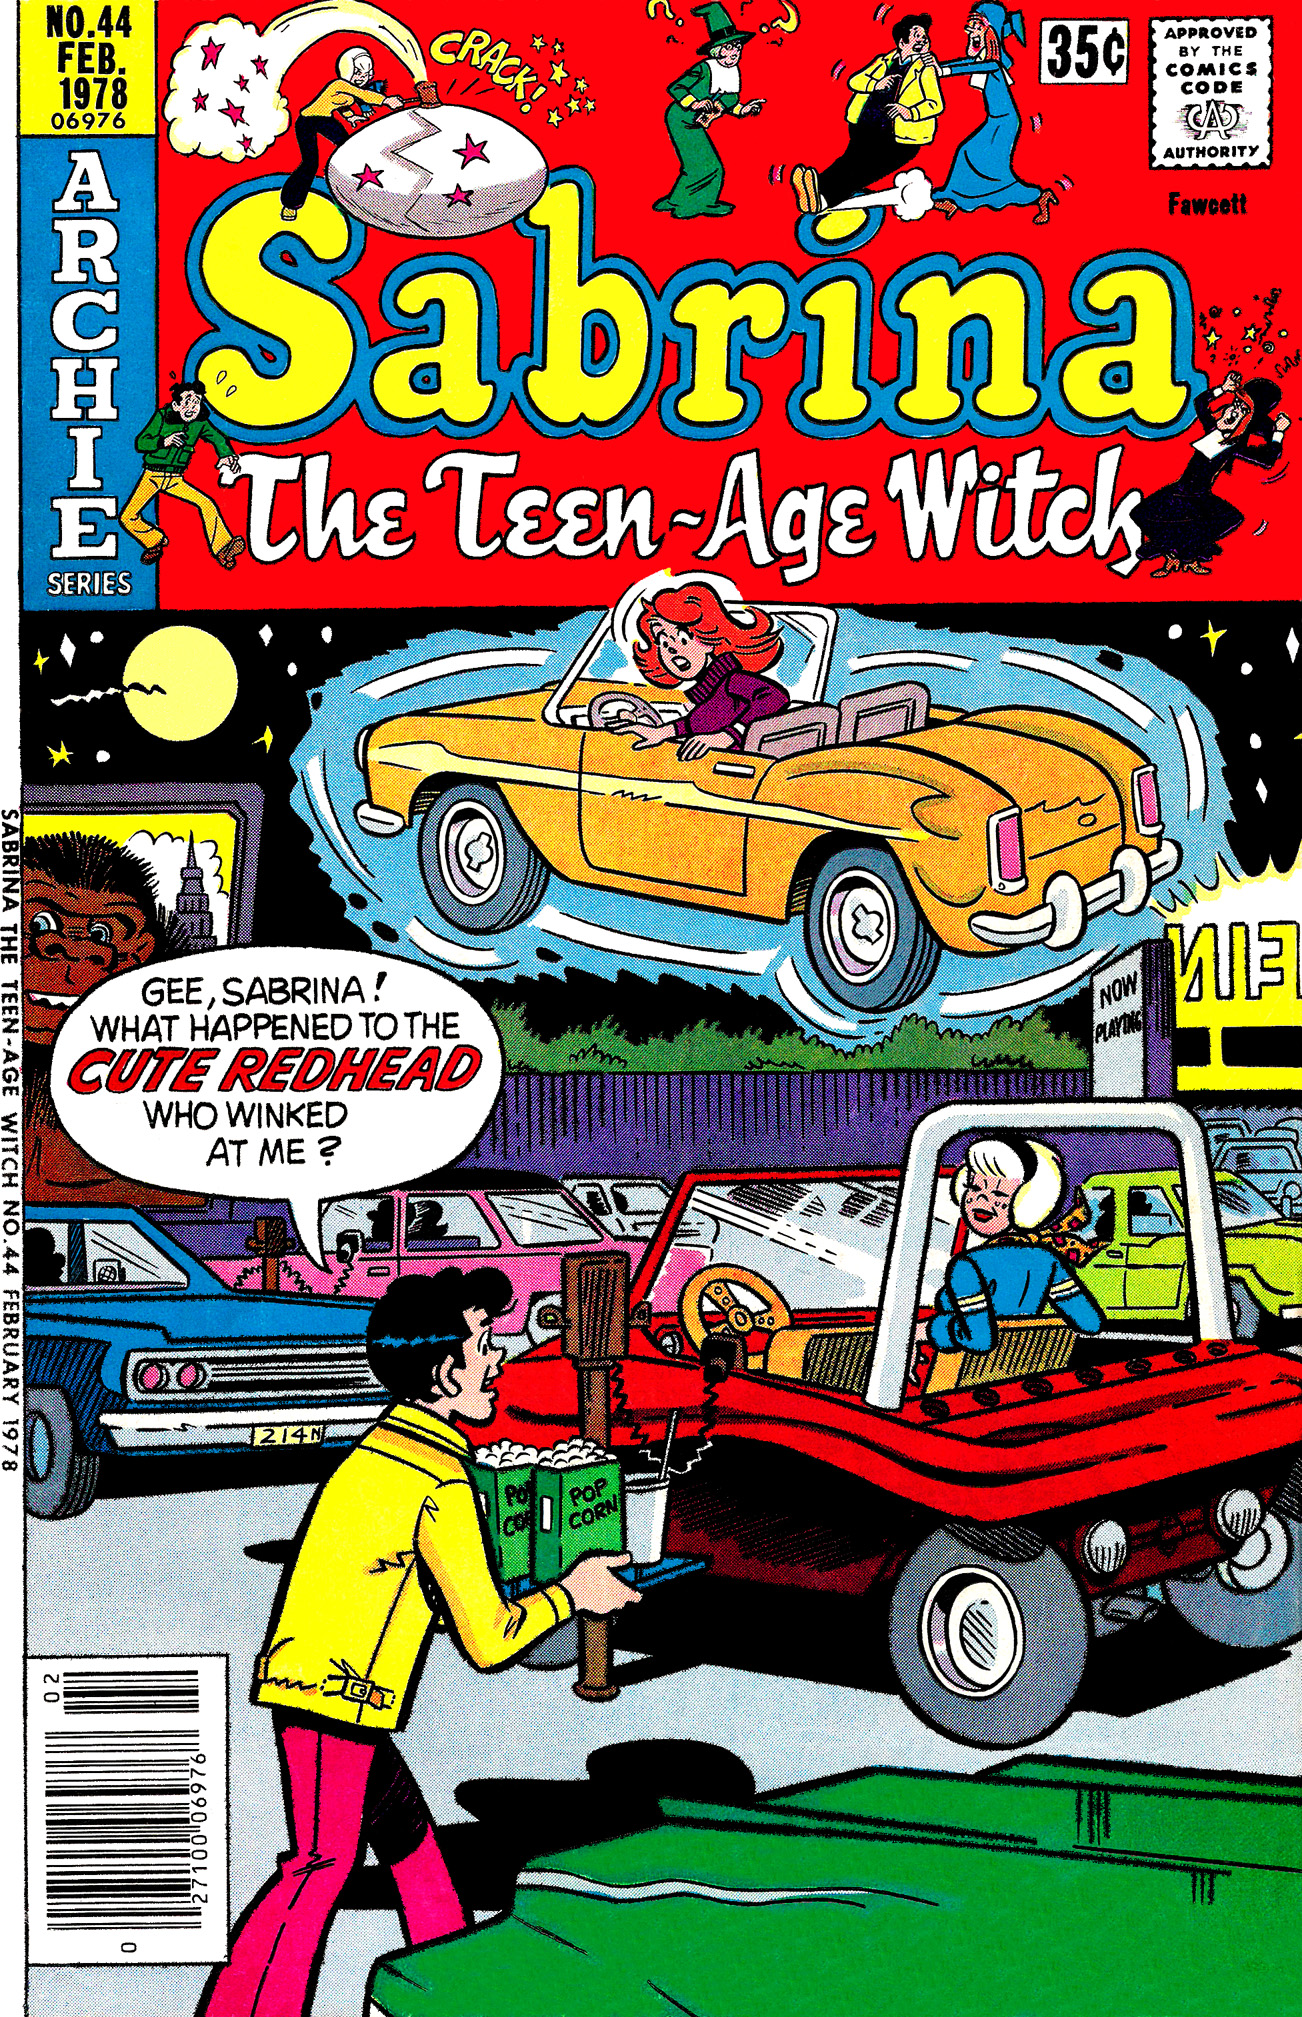 Sabrina The Teenage Witch (1971) Issue #44 #44 - English 1